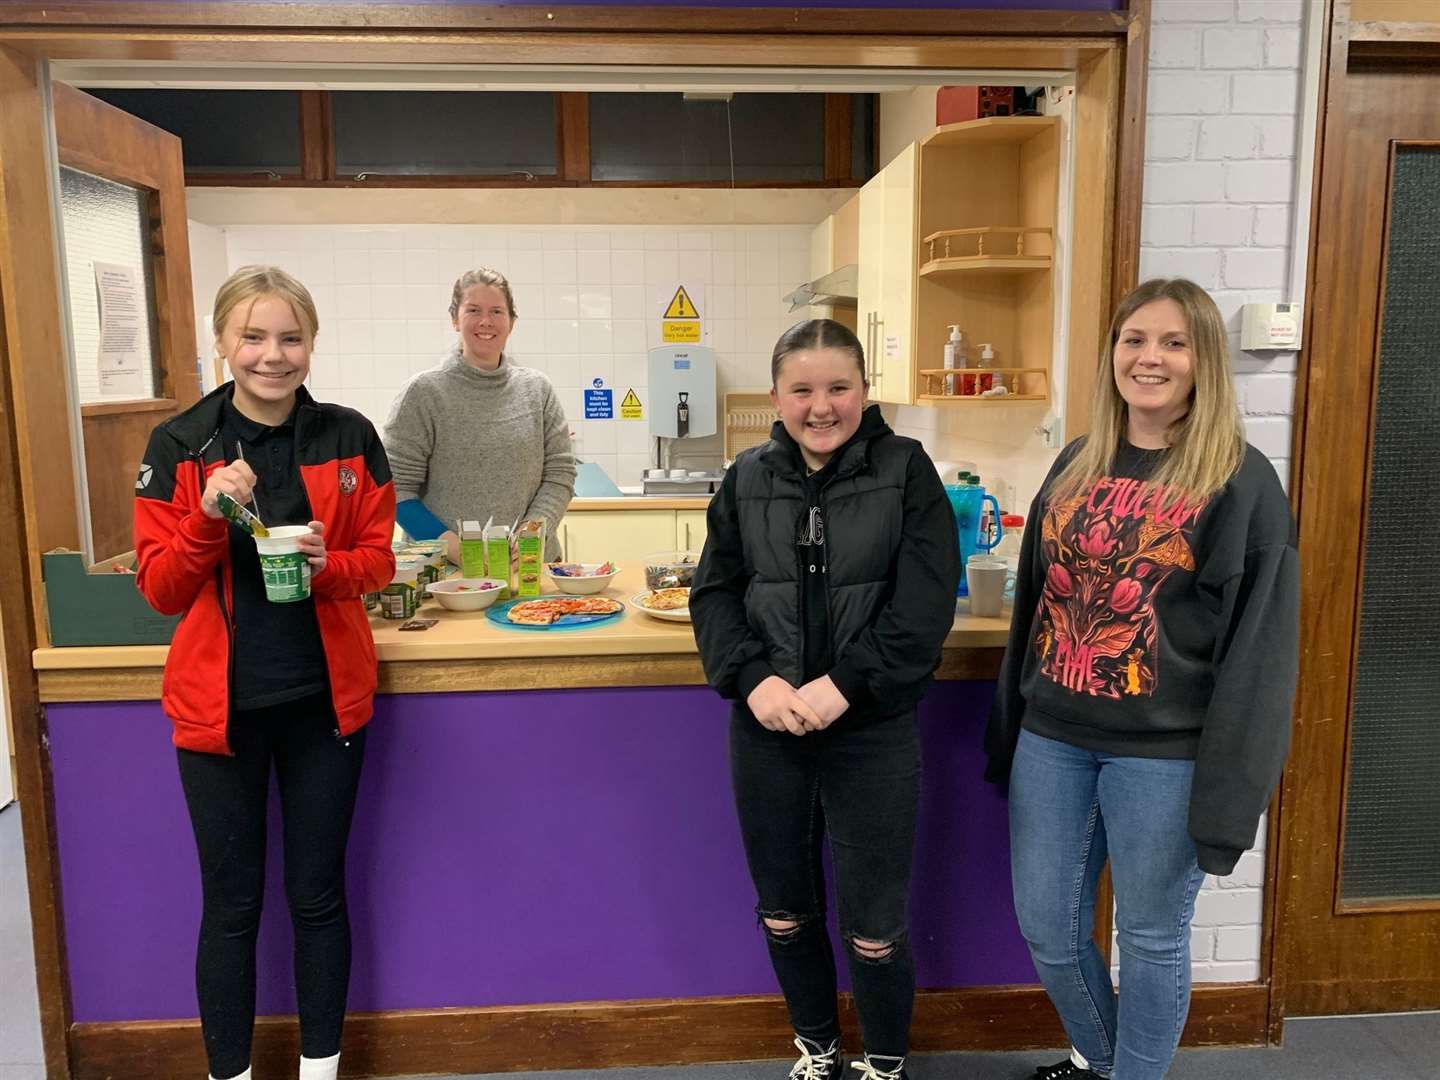 Sessional worker Rachel Paterson is behind the counter while in front stand Eva Mac, Rachel Drain and Rhionna Mackay, who also helps out at the youth club.